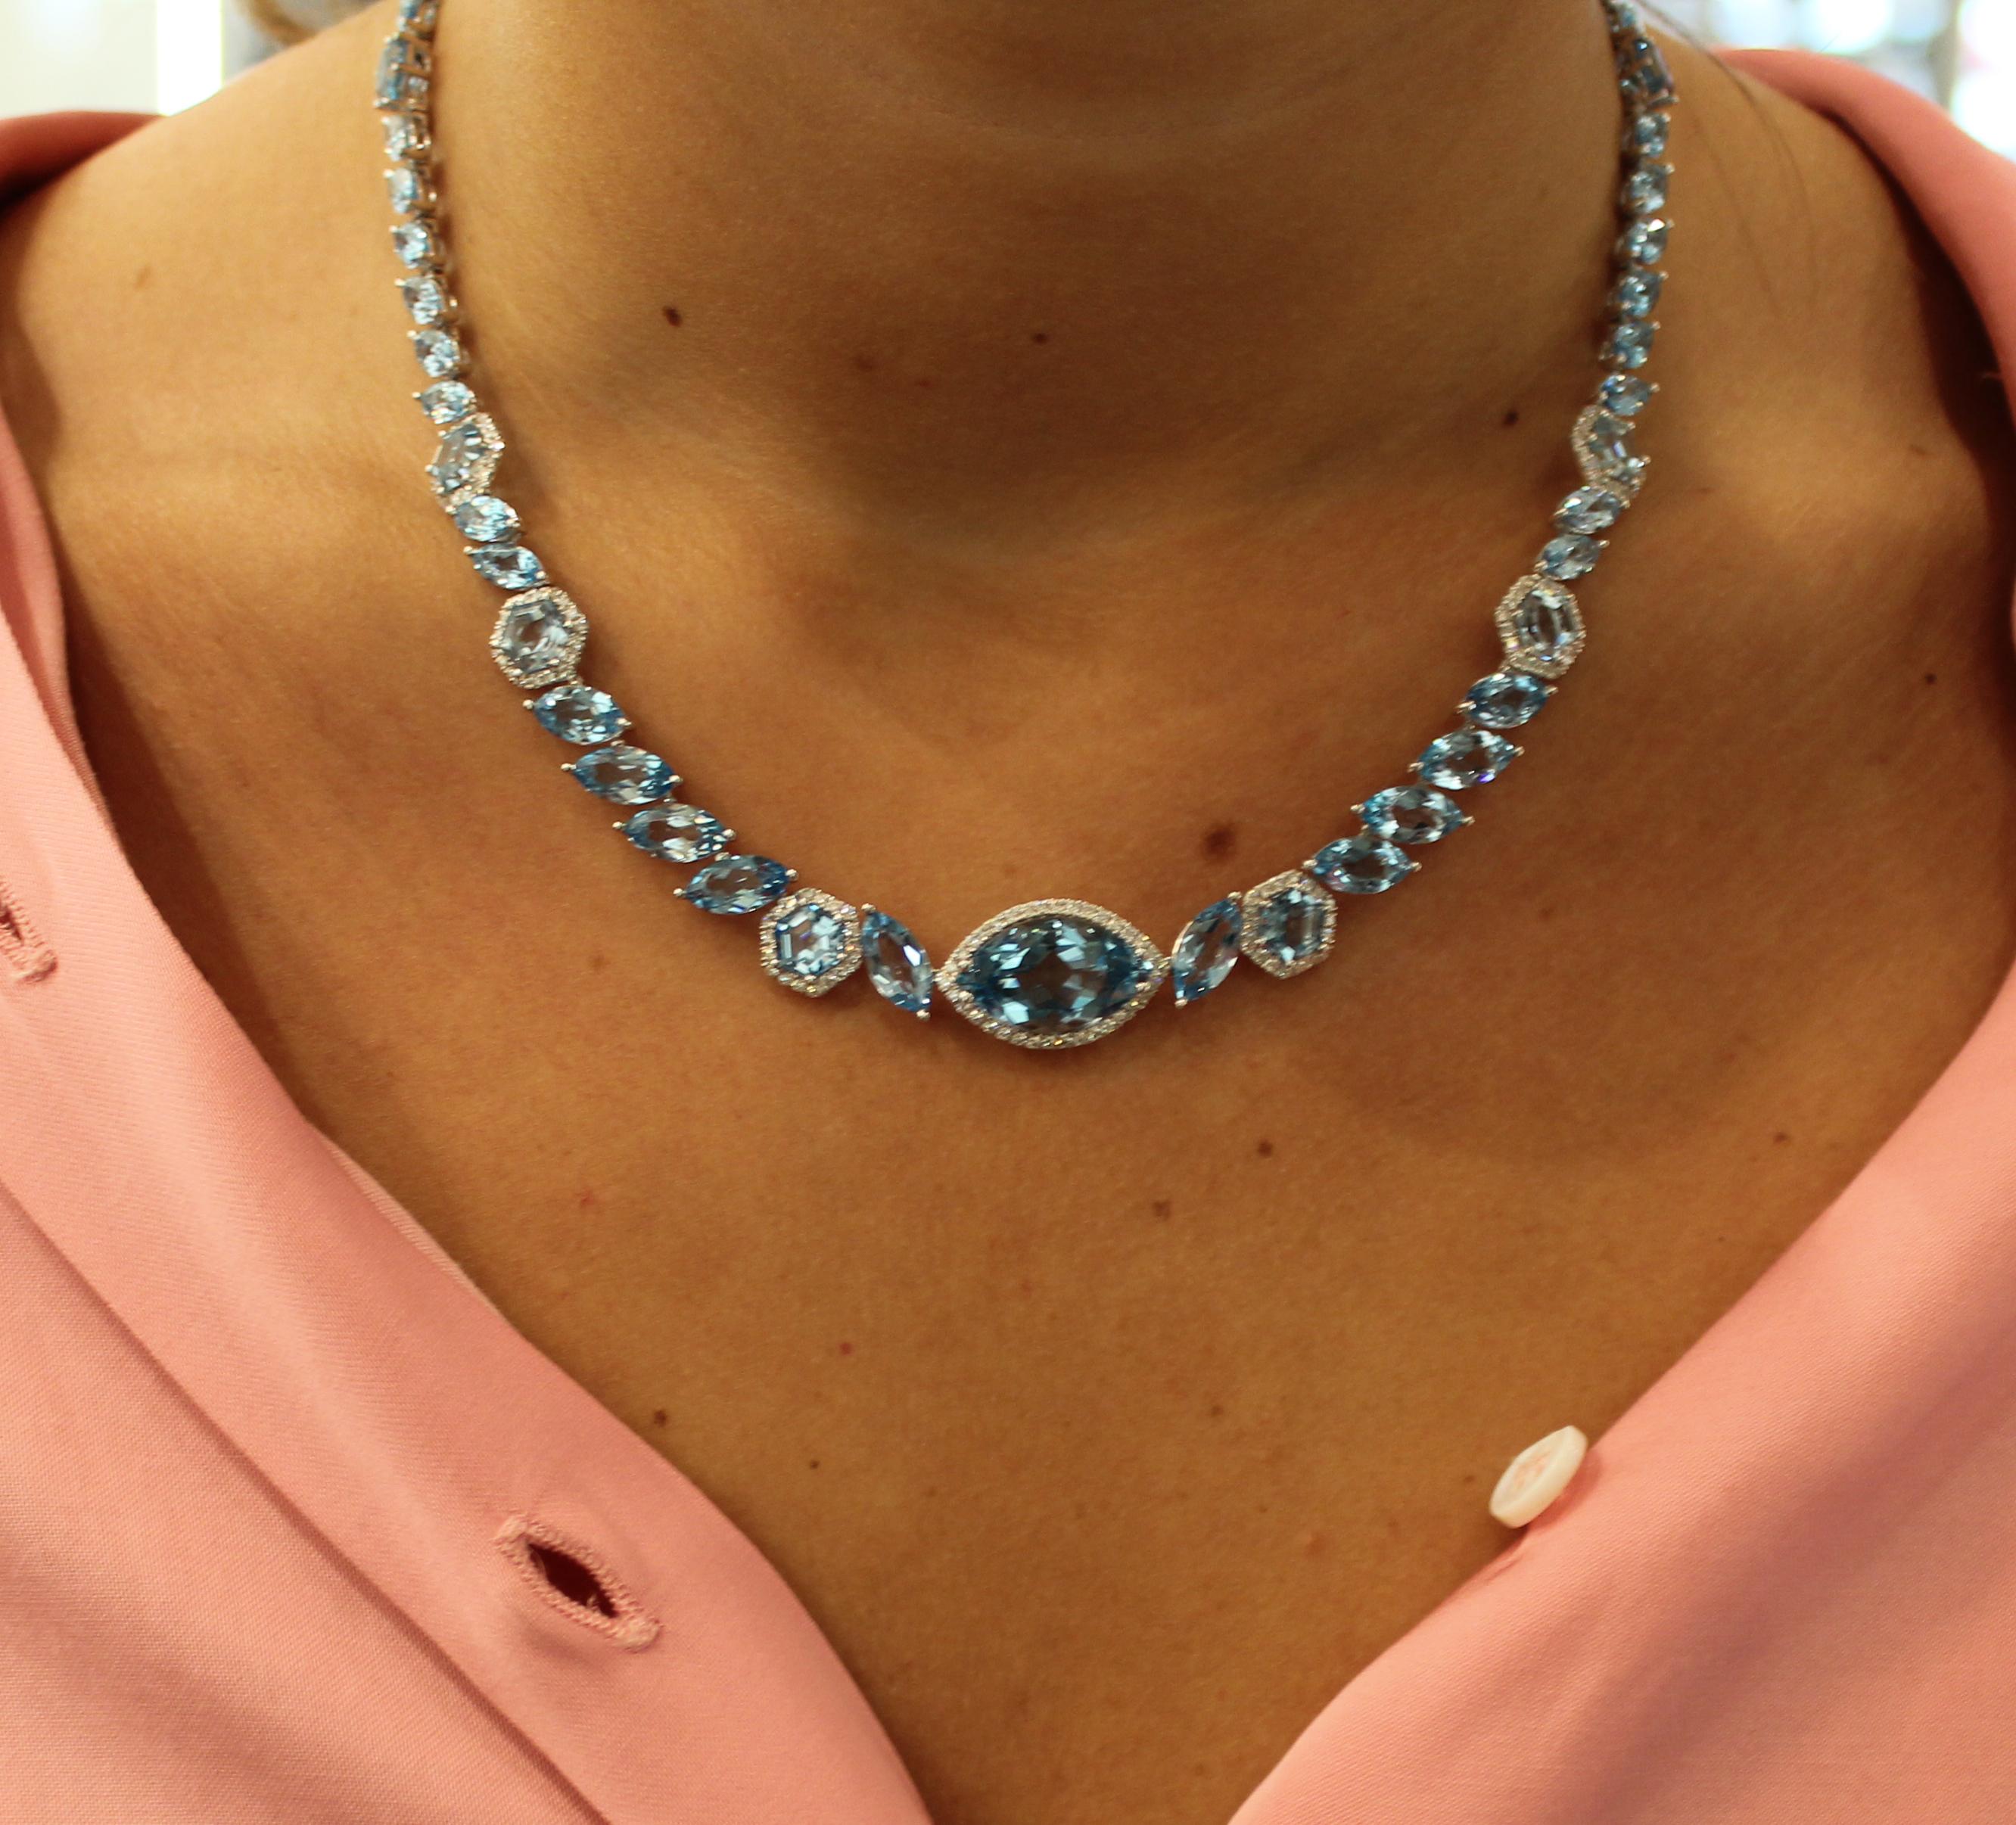 This Special Edition piece was designed by Kiki McDonough to celebrate the wonderful shapes of gemstones.  Using 57.70cts of Marquise and Octagonal cut Blue Topaz with 1.18cts of accent diamonds Kiki has created a necklace inspired by laurel leaves,